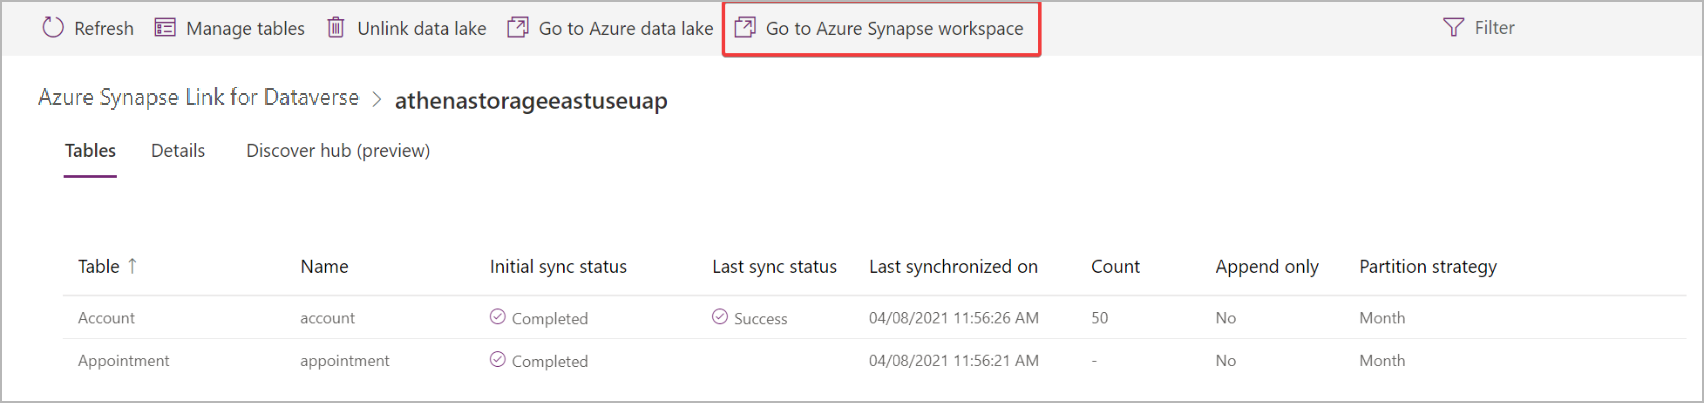 Go to Azure Synapse Workspace